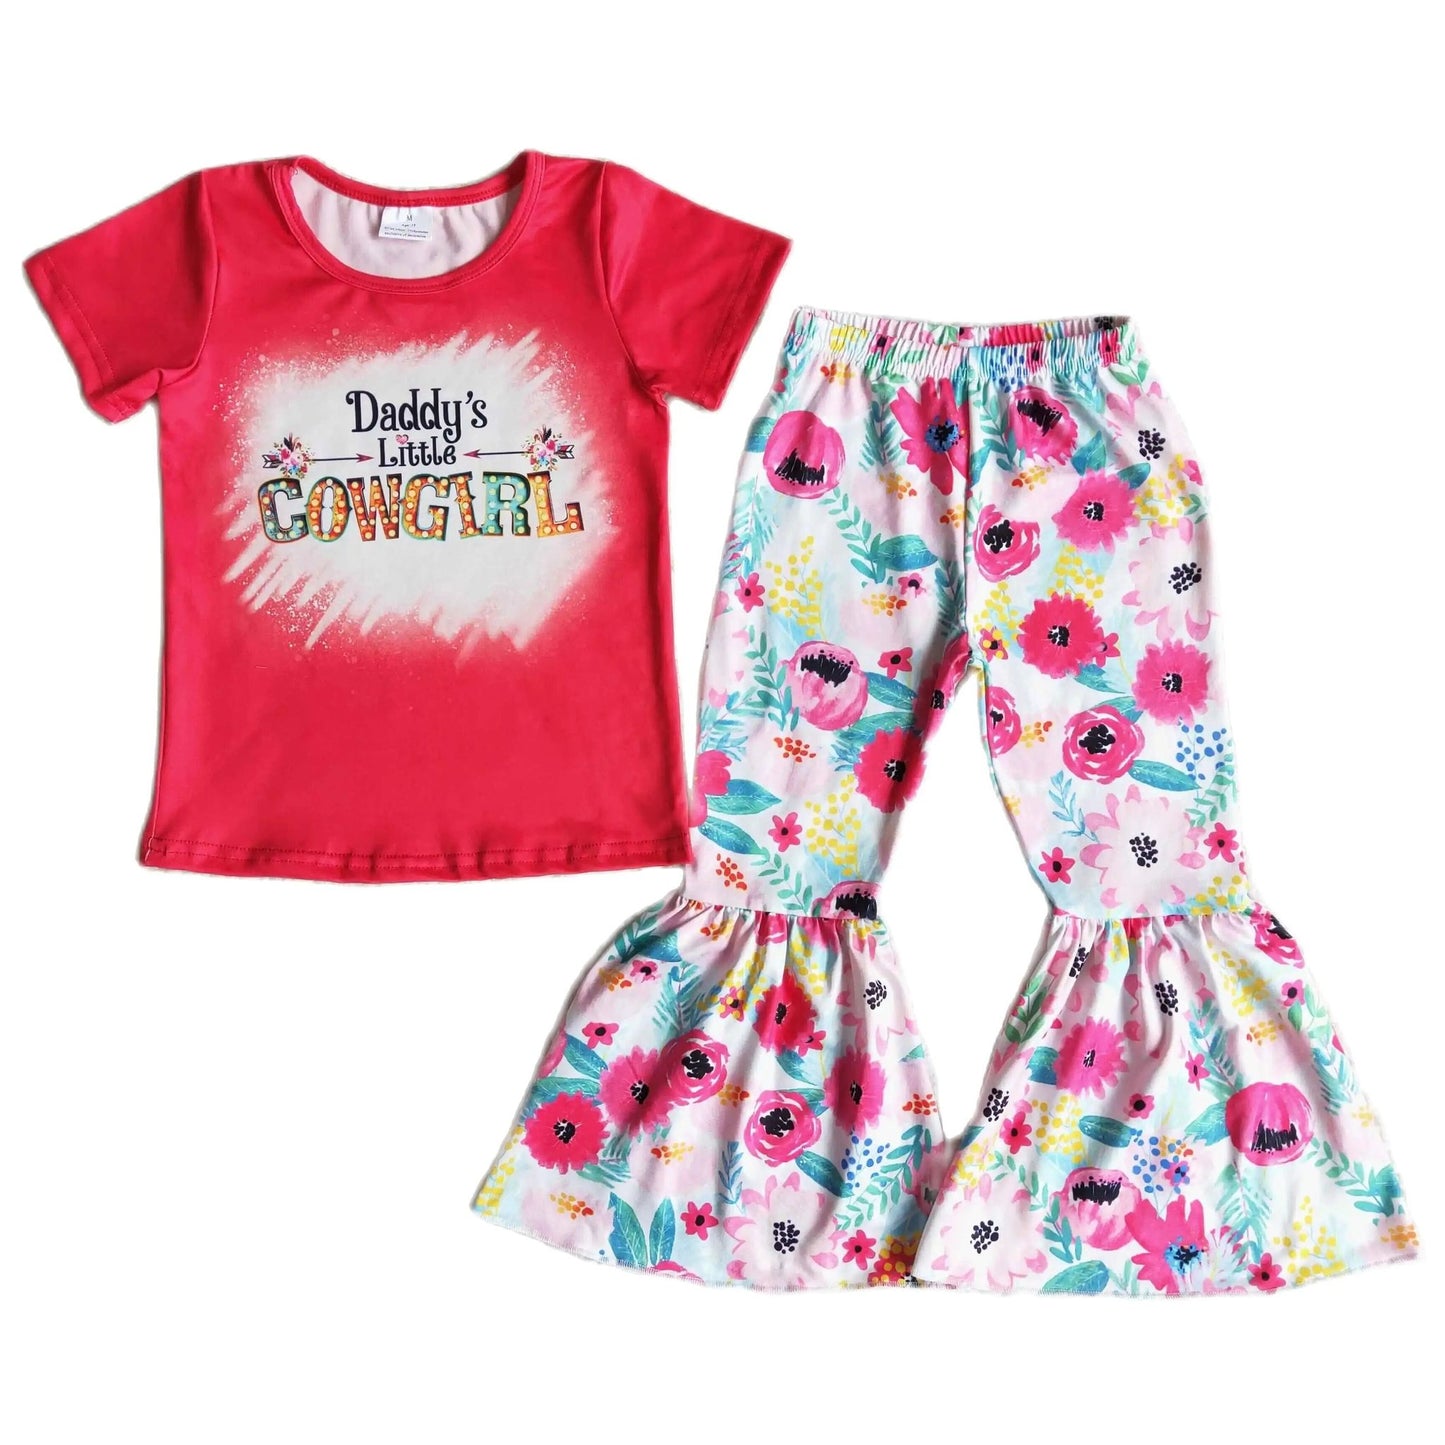 SALE! Girls Western Daddy's Little Cowgirl Floral Bottom Pants Outfit